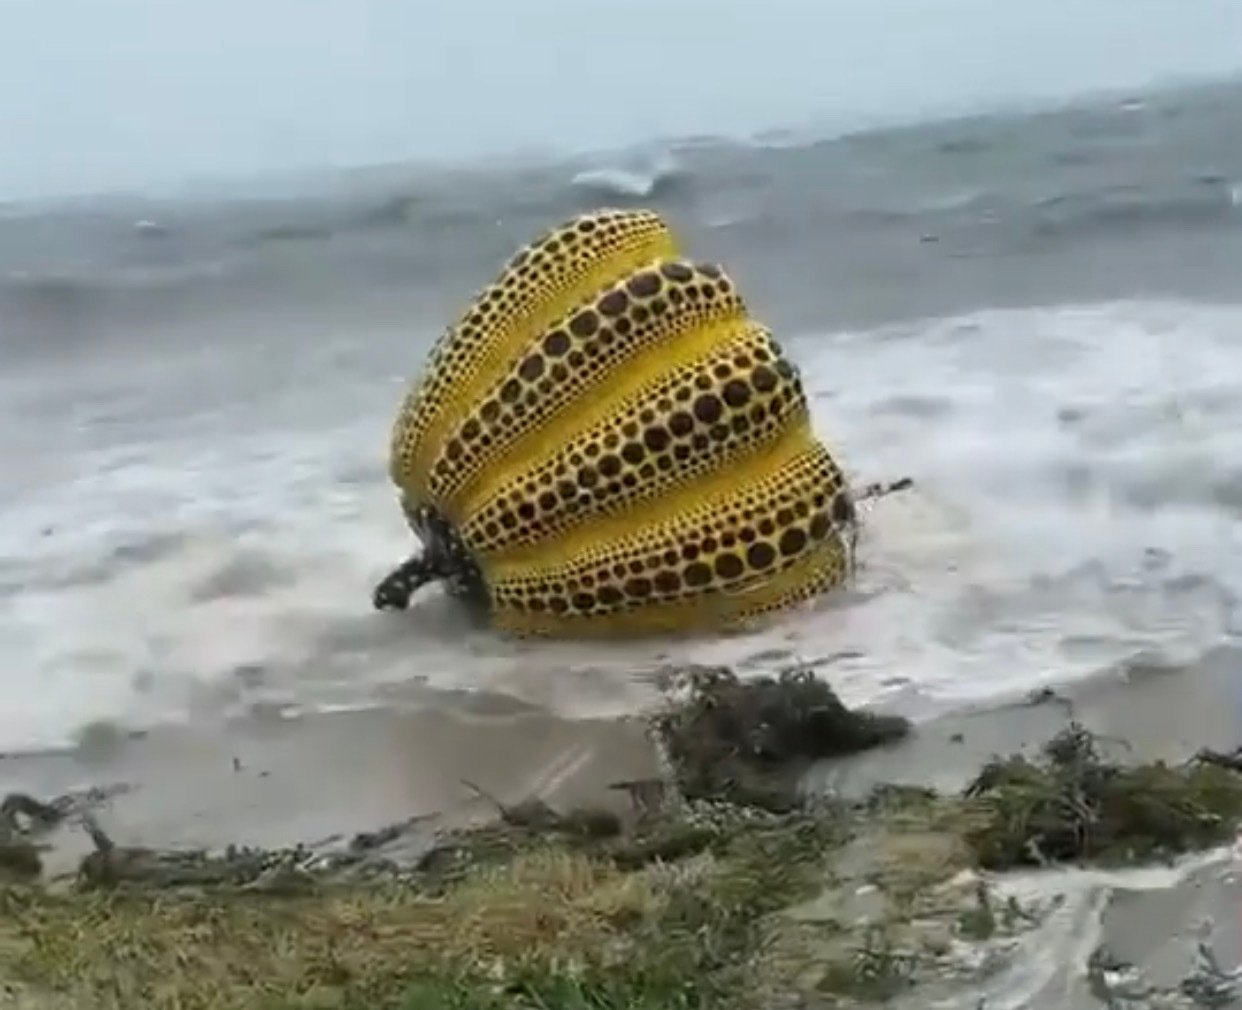 Daily digest: The first Yayoi Kusama pumpkin toppled by a typhoon